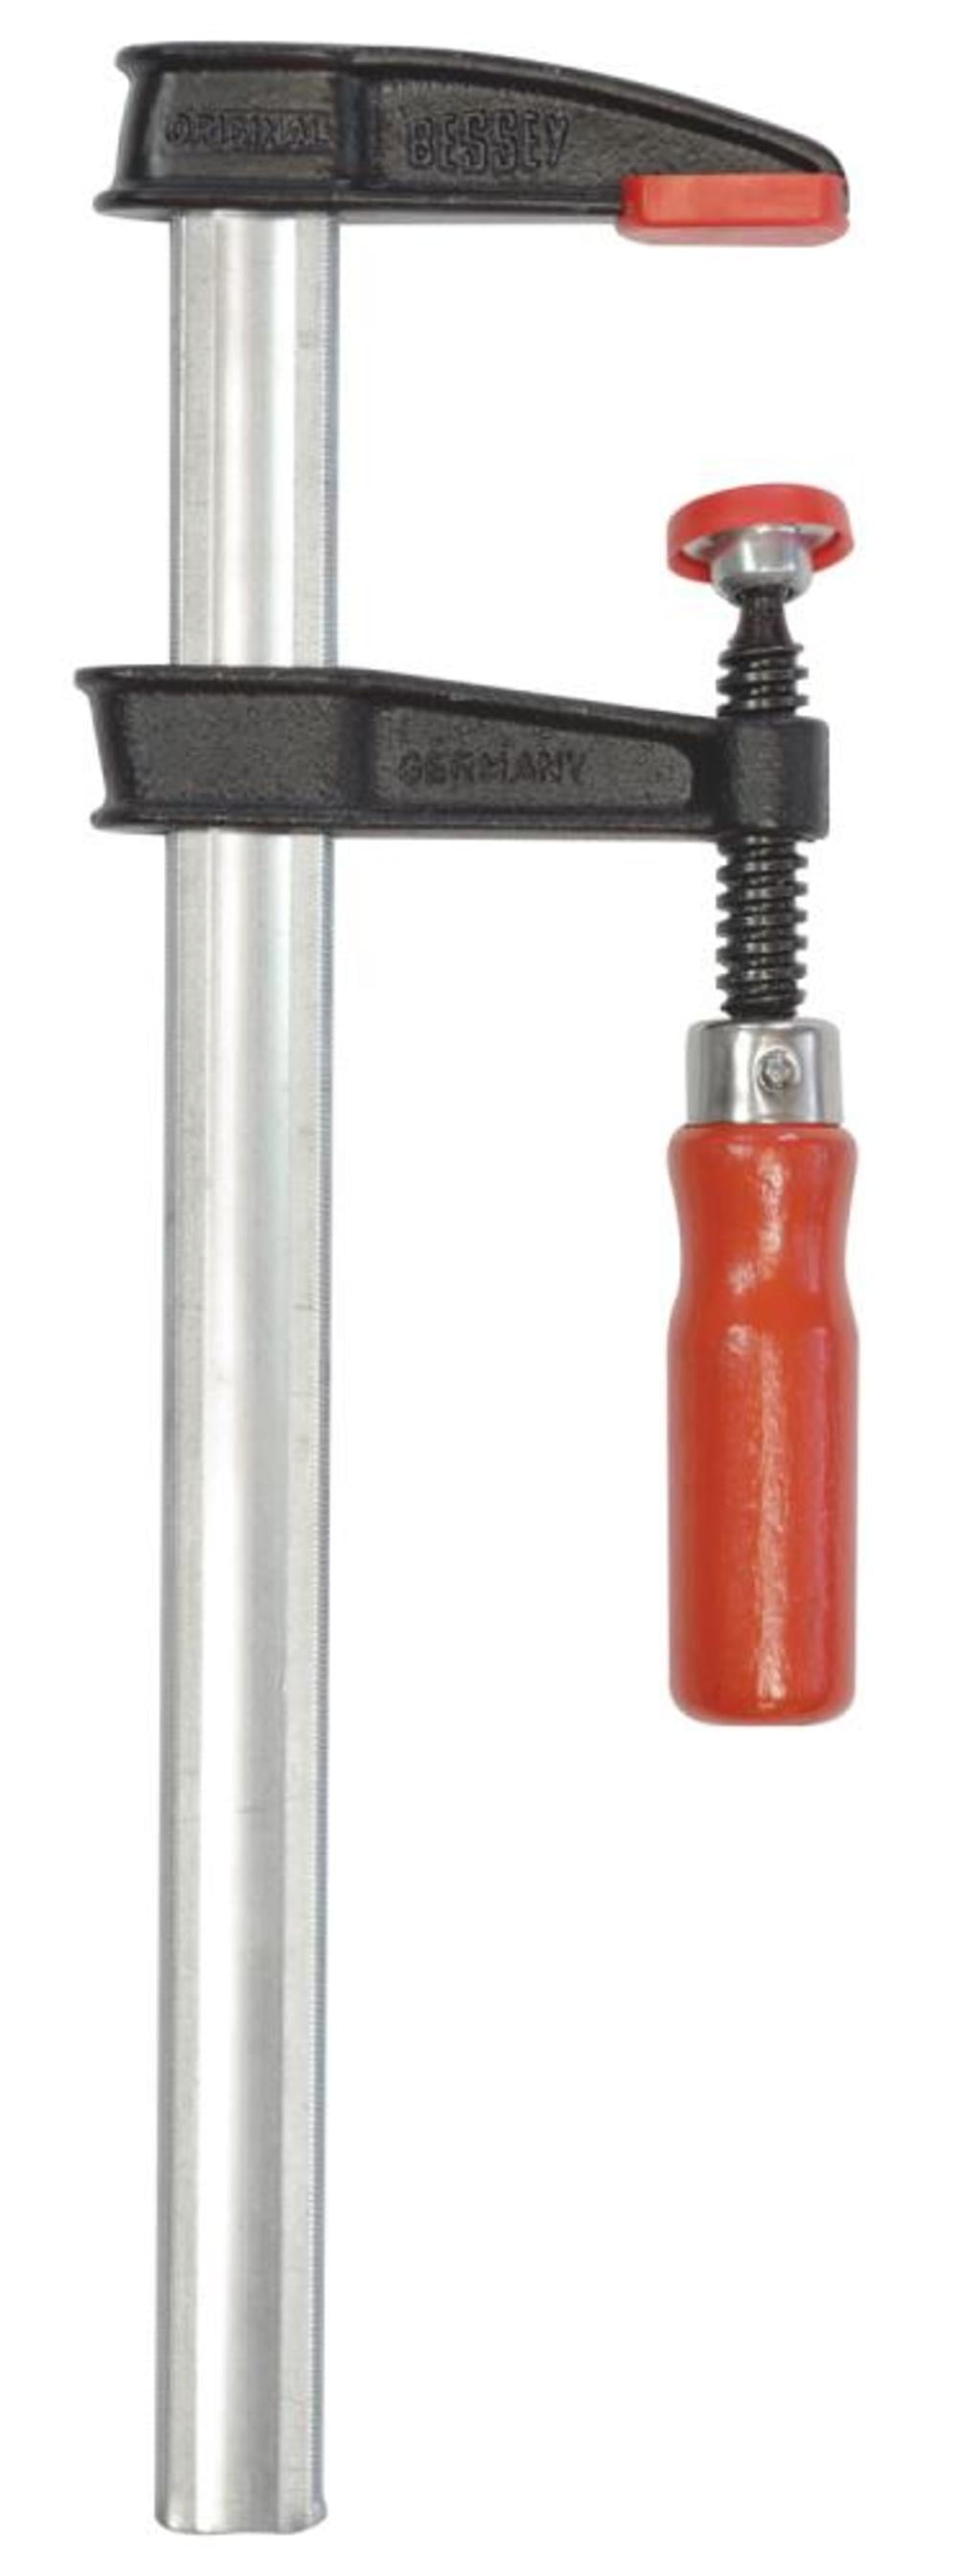 Bessey 1.5" C-Clamp Regular Duty with Socket Head Spindle